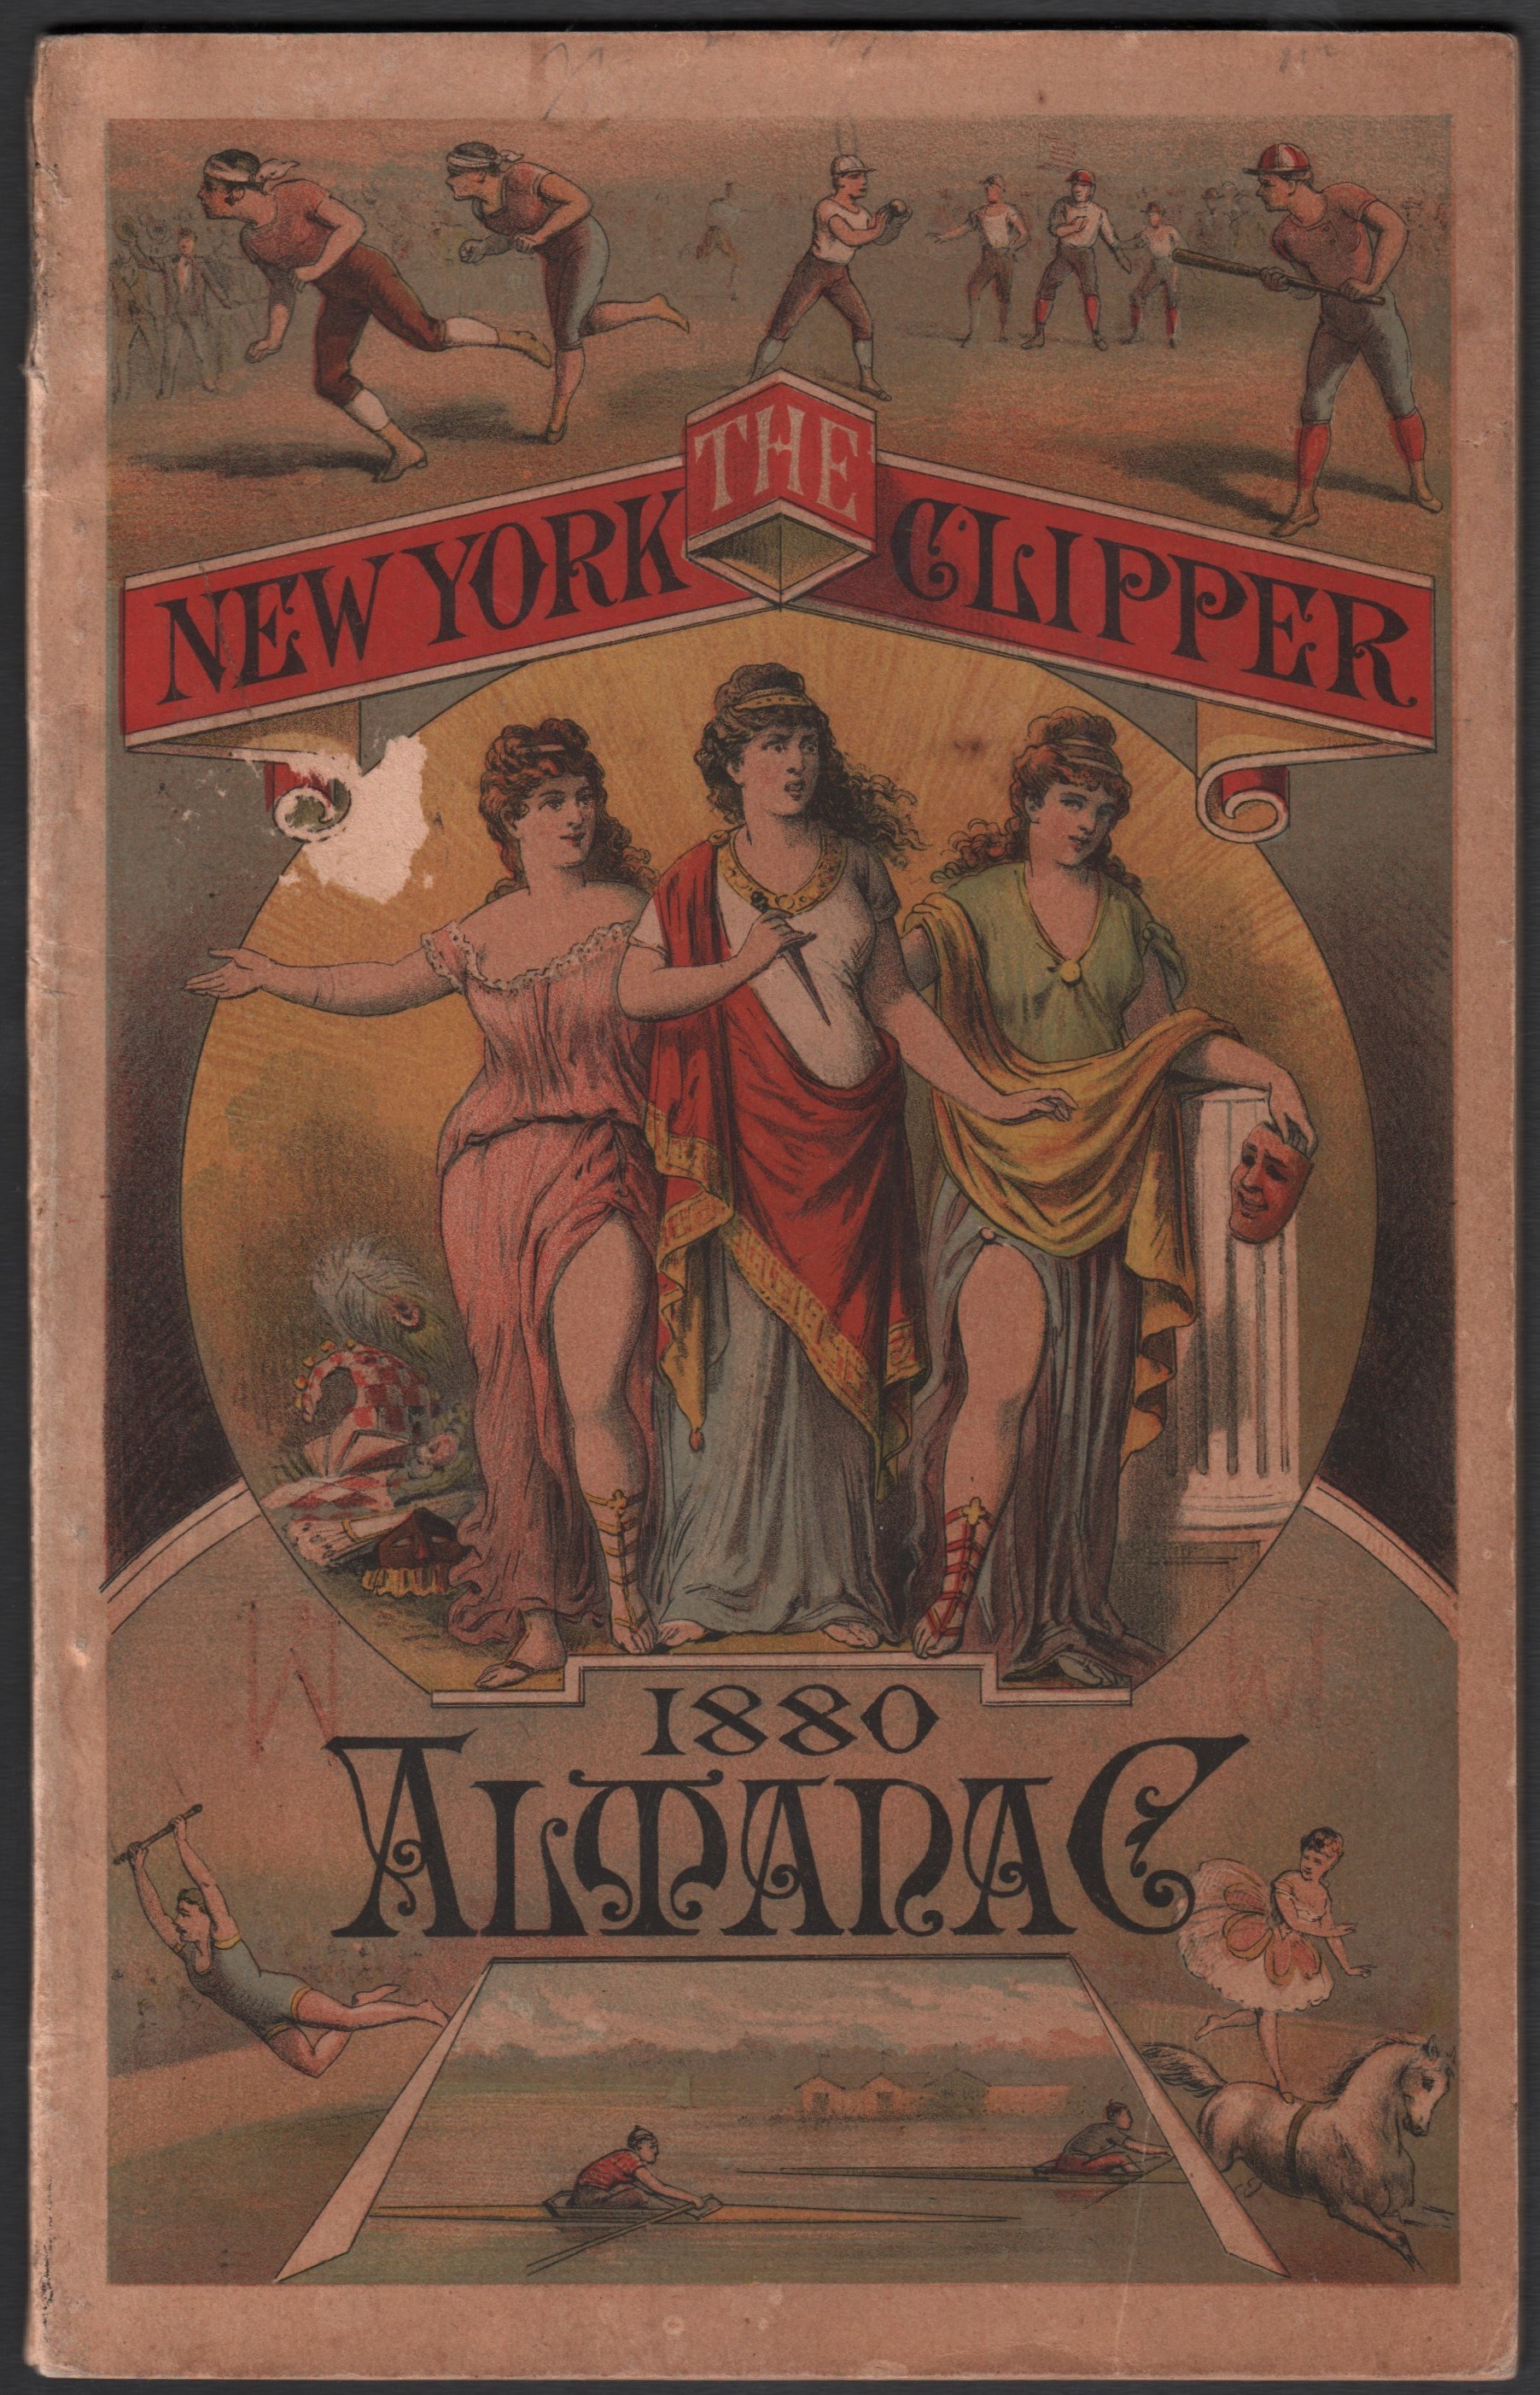 - The New York Clippers 1880 Almanac